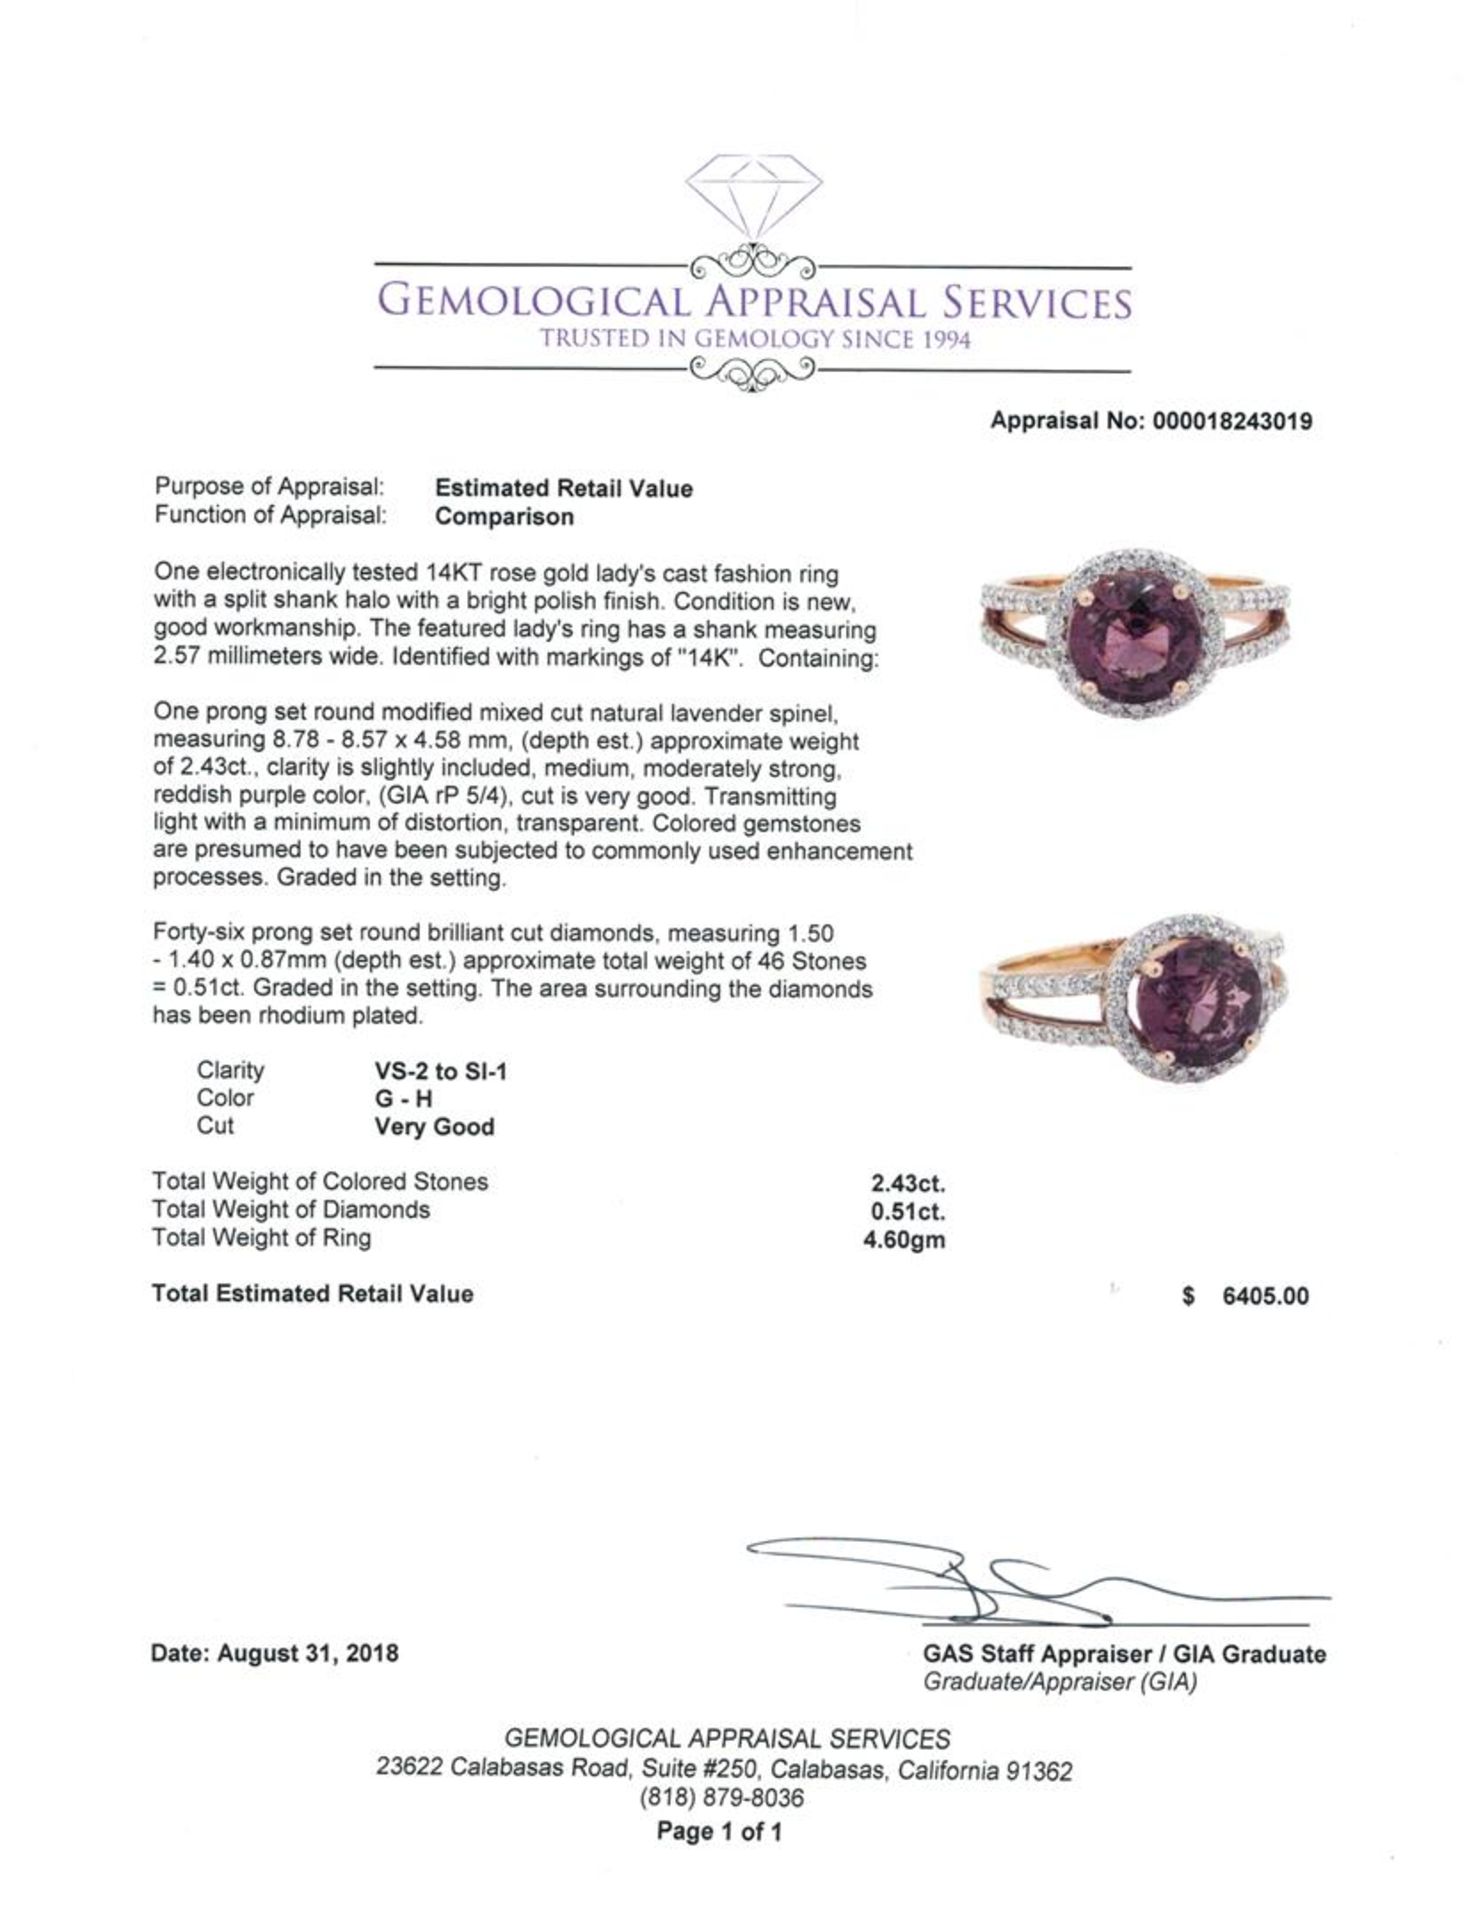 2.94 ctw Round Mixed Lavender Spinel And Round Brilliant Cut Diamond Ring - 14KT - Image 5 of 5